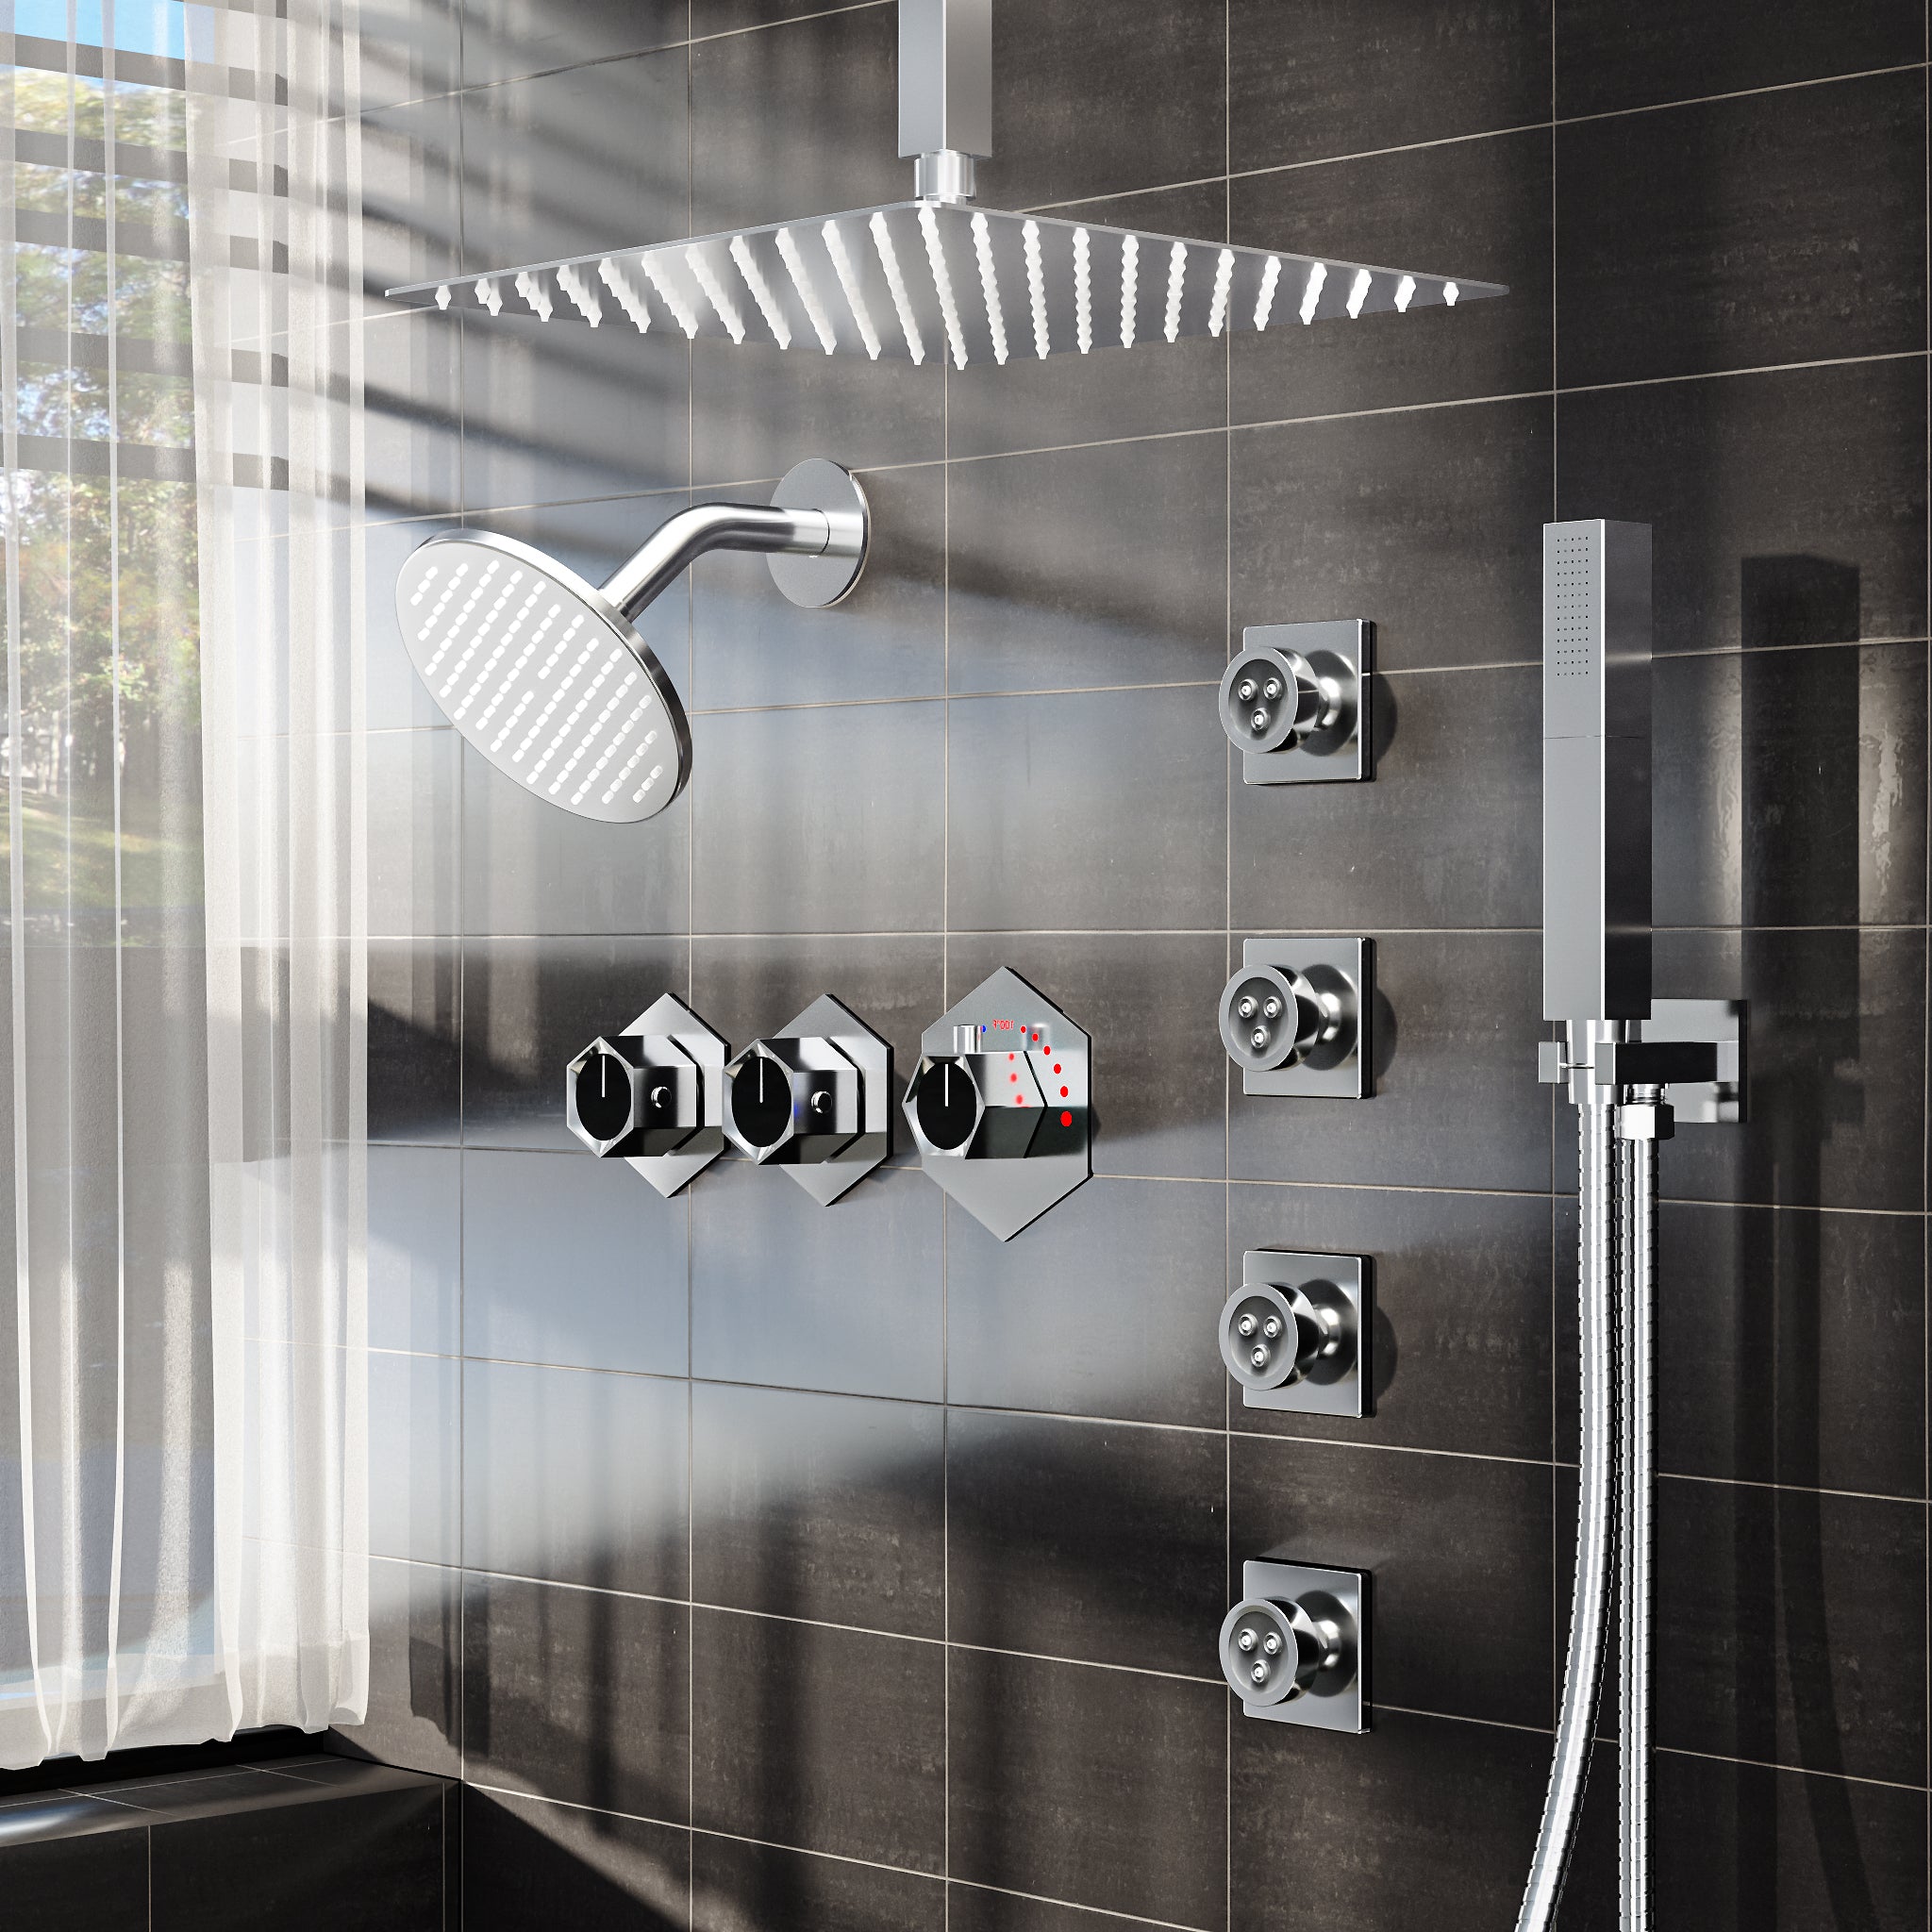 EVERSTEIN SFS-1039-NK12 12" Dual Rainfull Shower Faucet with 8-Spray Patterns, Celling Mounted and Rough-in Valve, 2.5 GPM